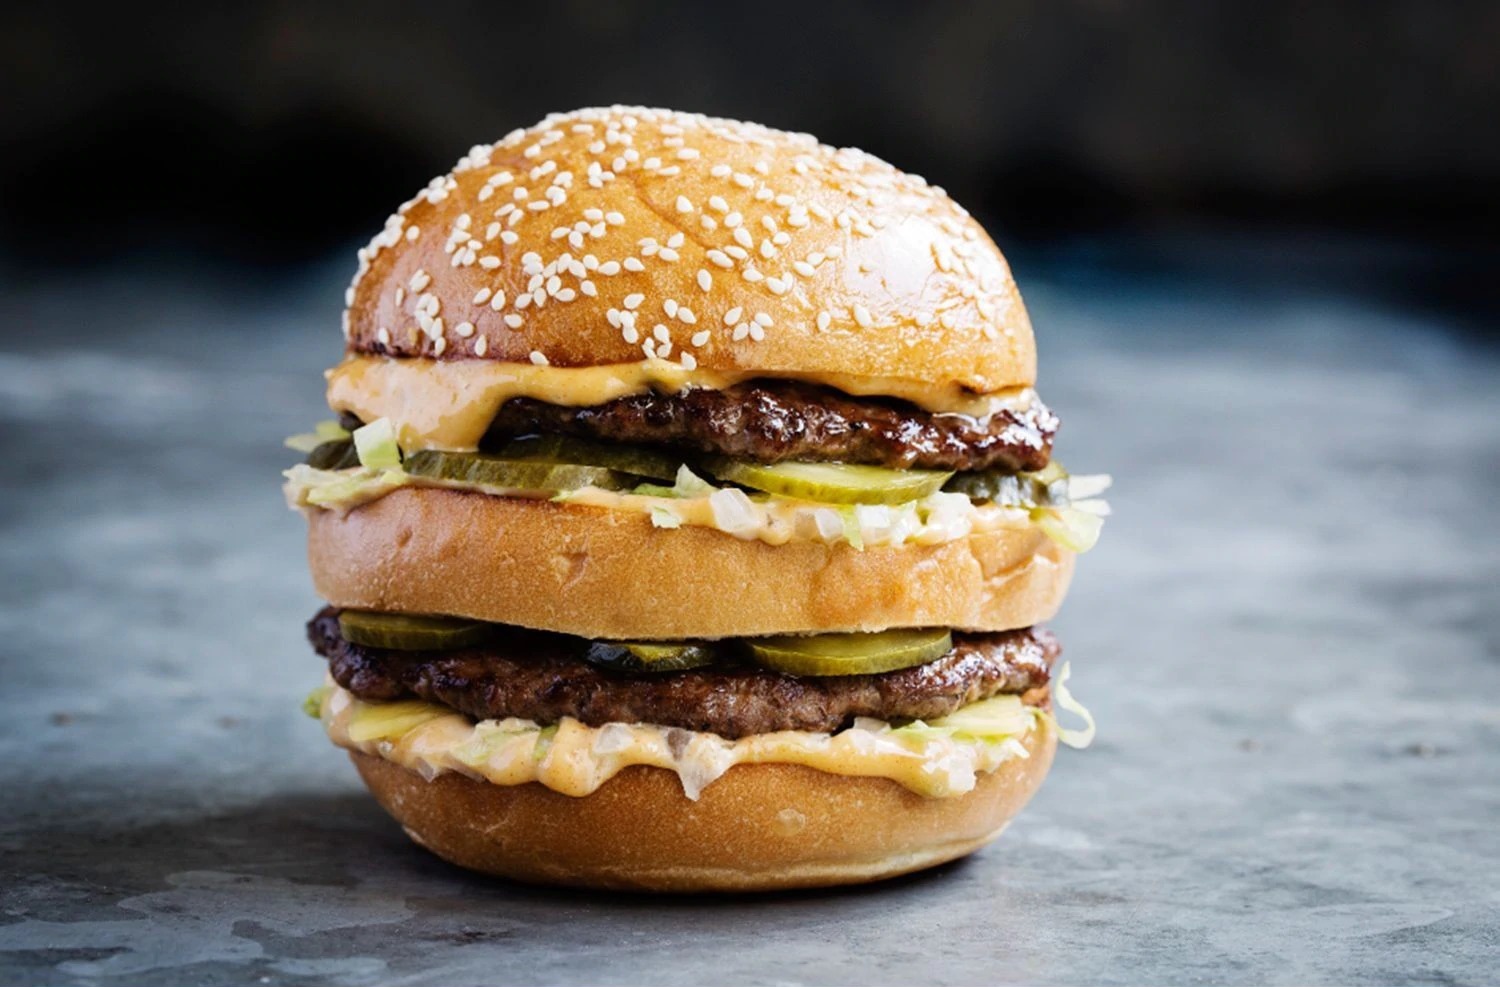 We Know Your Exact Age Based on the Foods You Love and Hate Mcdonald's Big Mac